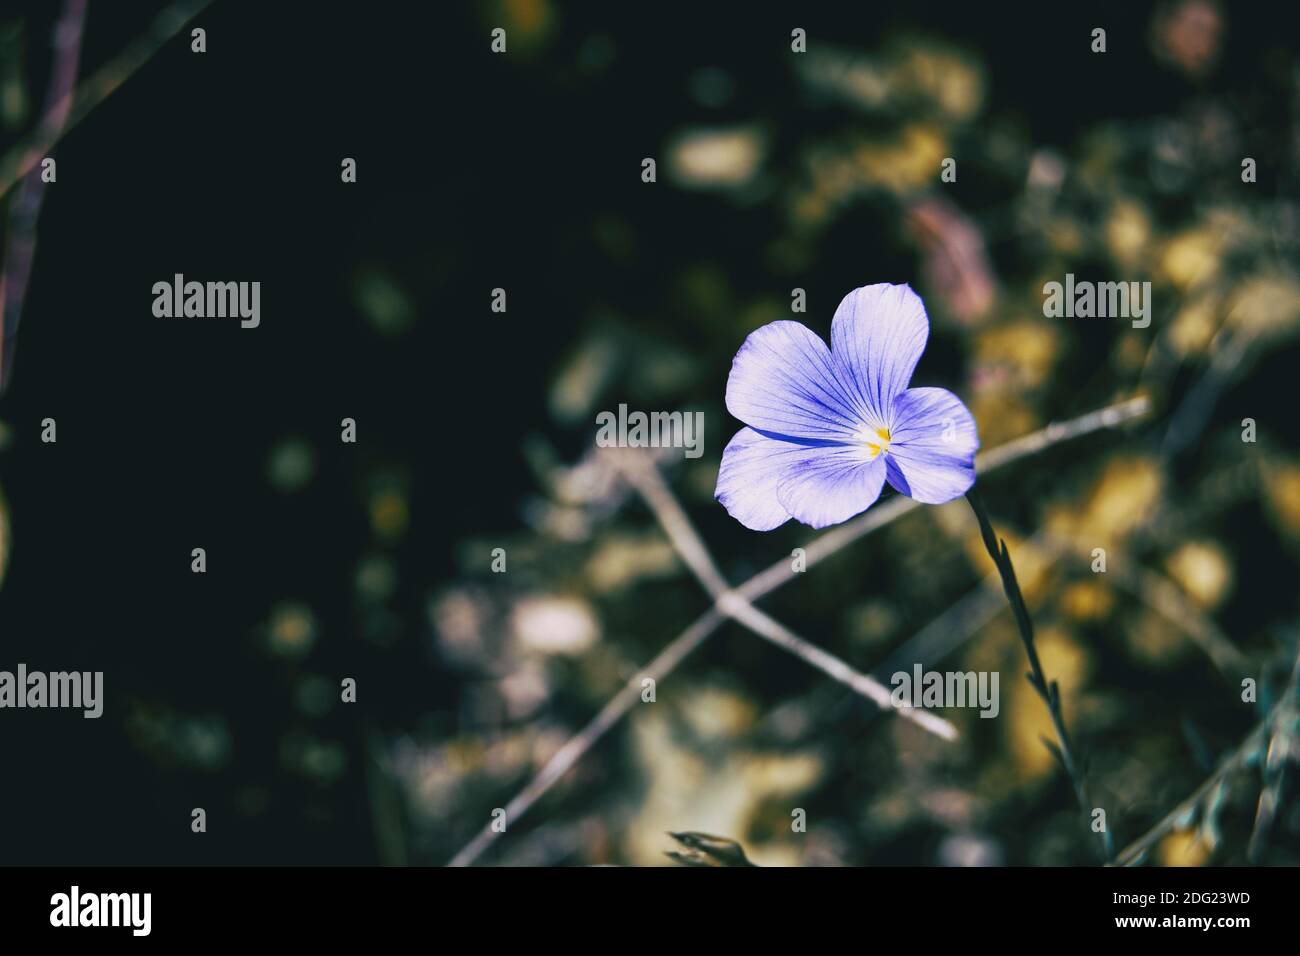 a single small purple flower on the right side of the photo in nature Stock Photo